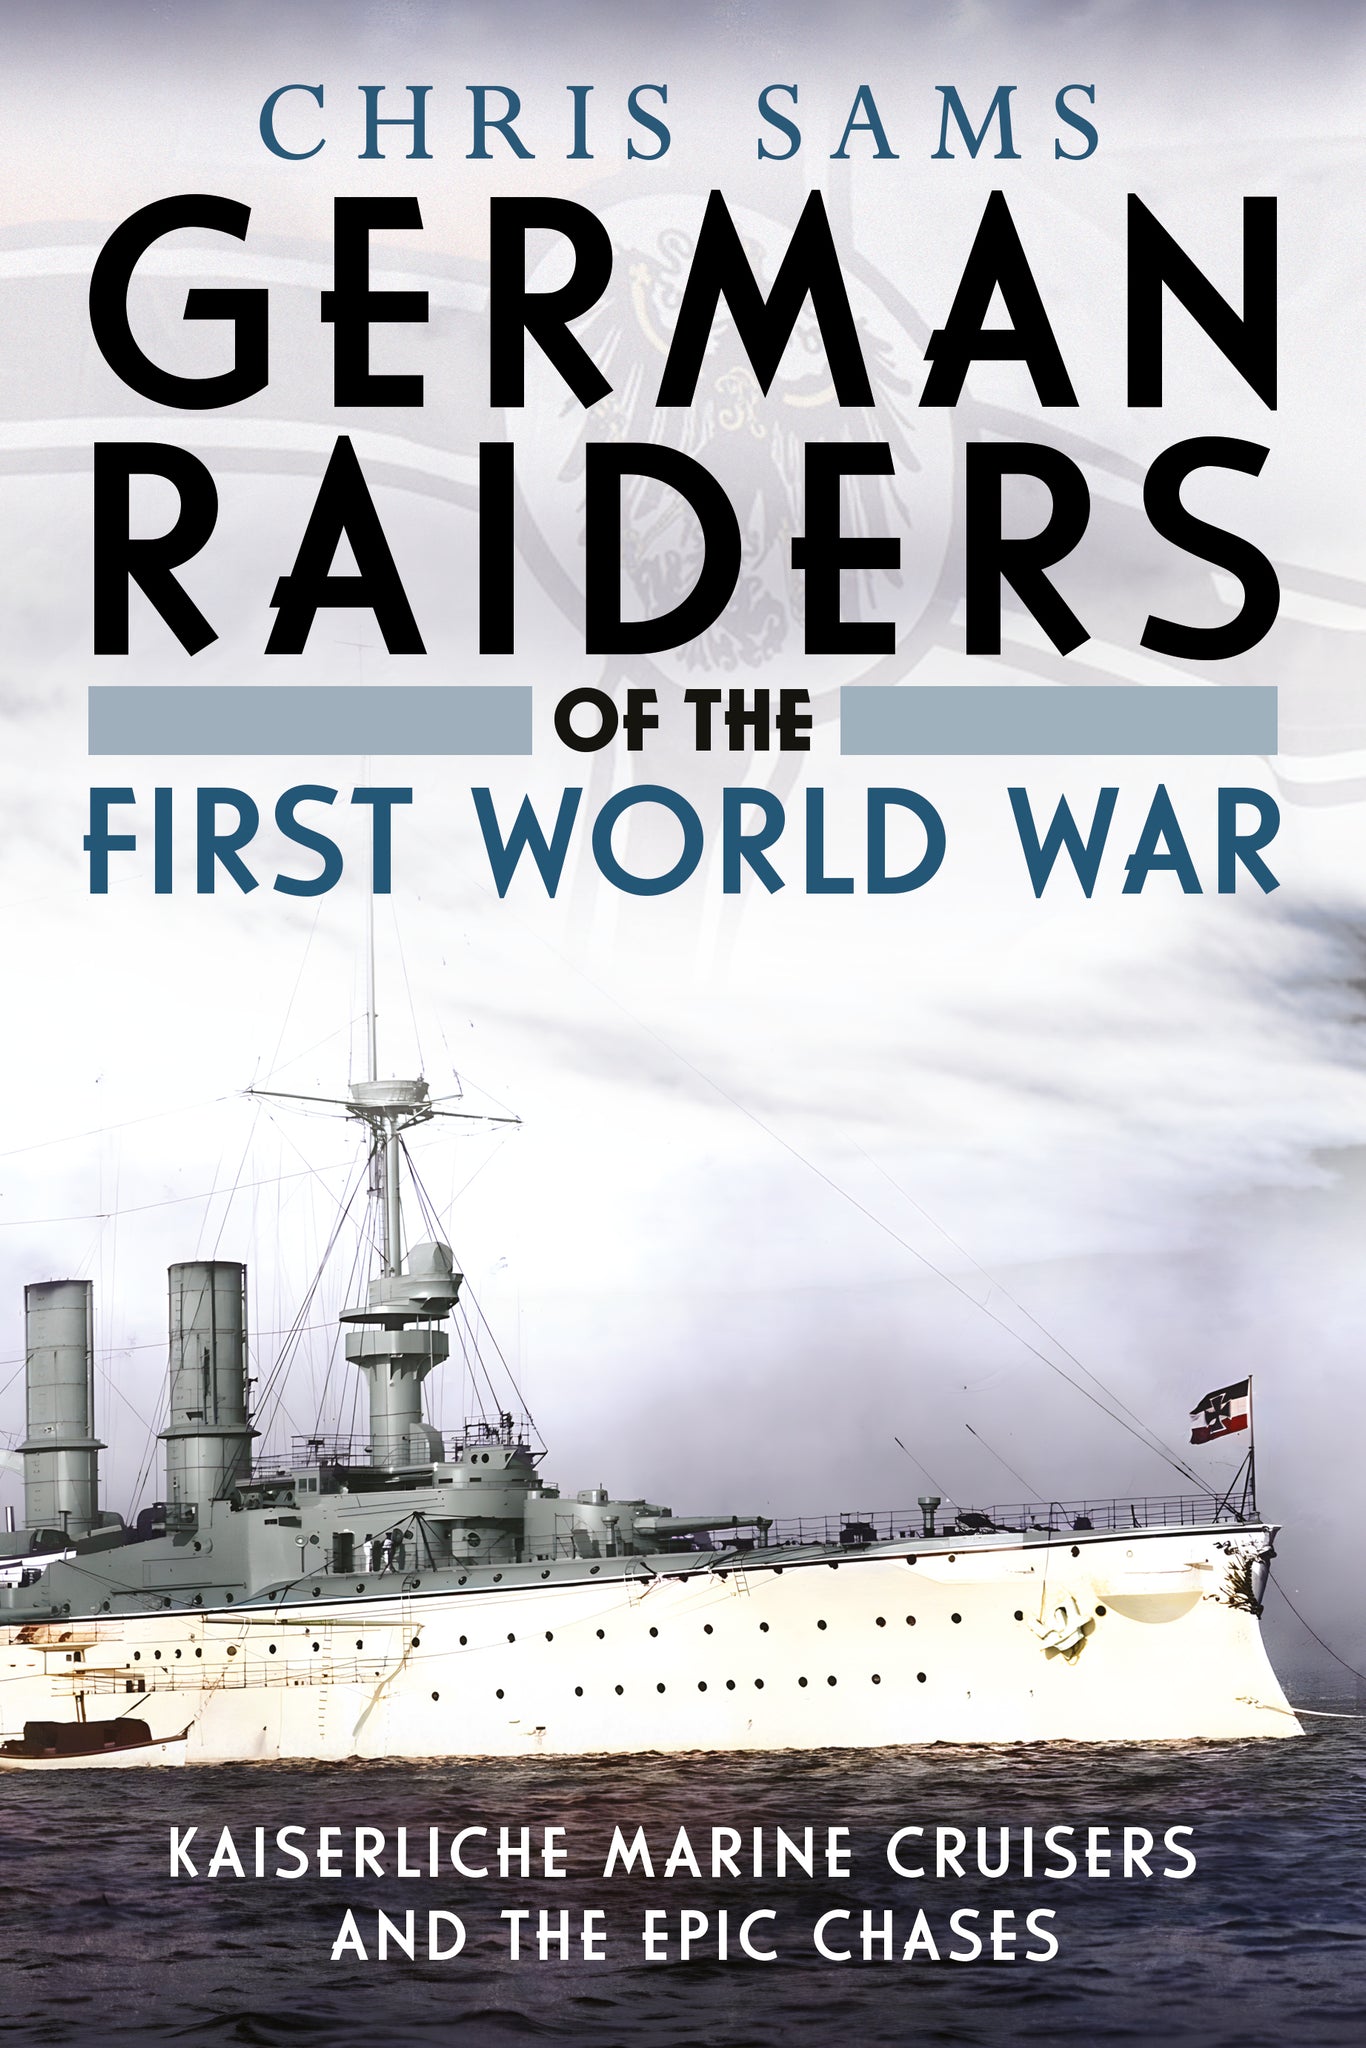 German Raiders of the First World War (paperback edition)